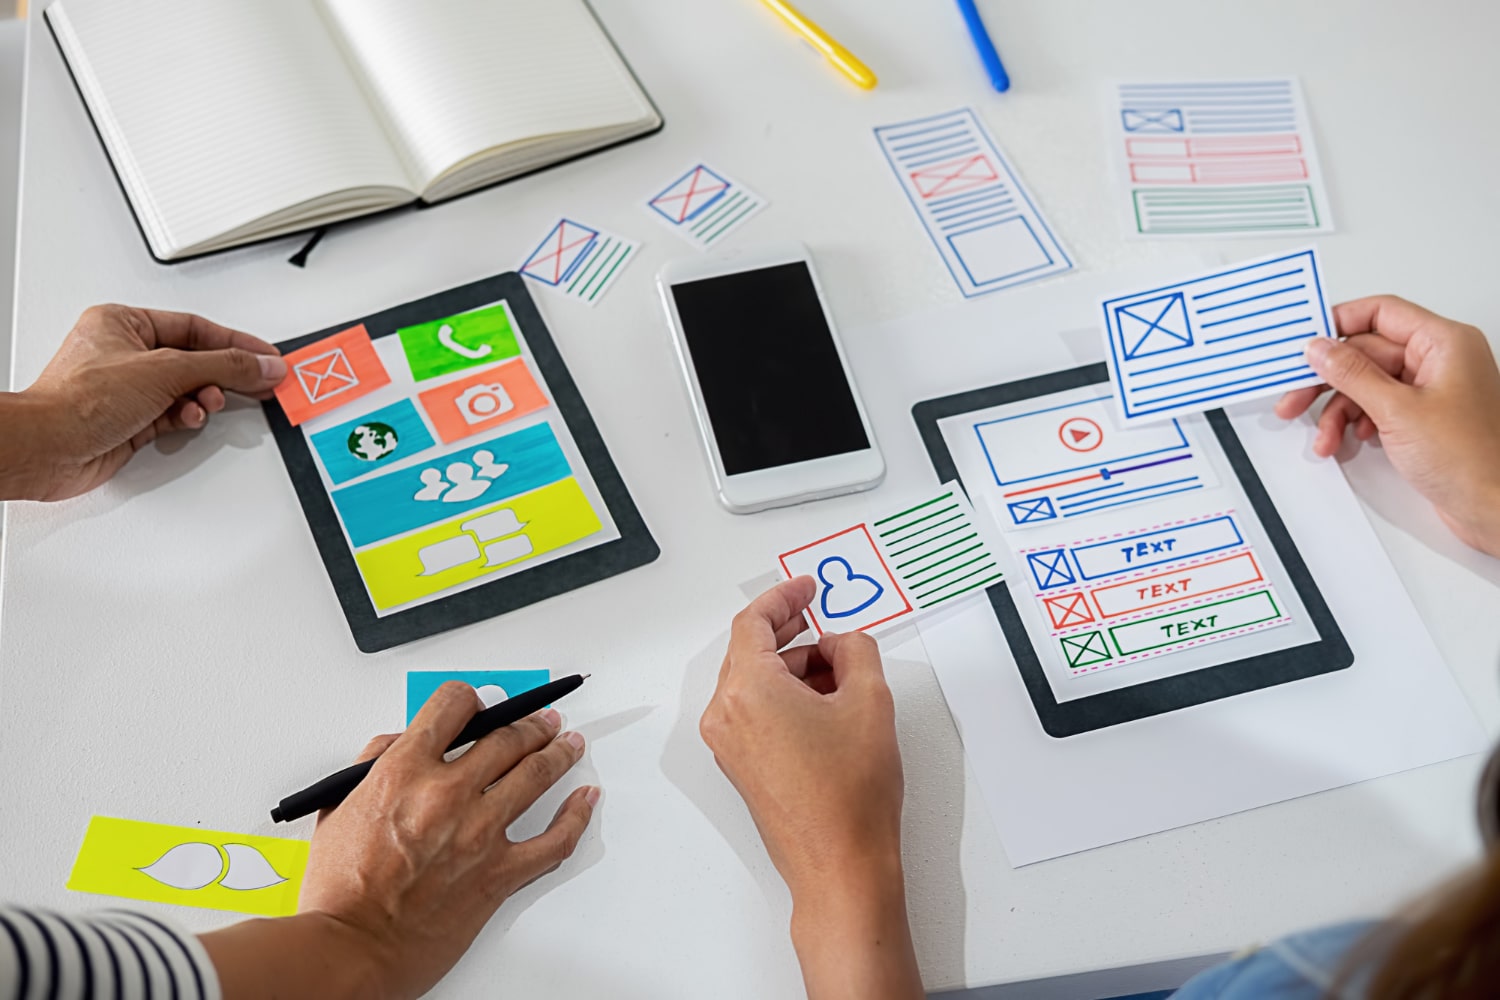 UX Vs UI Designer: Which One is More in Demand?